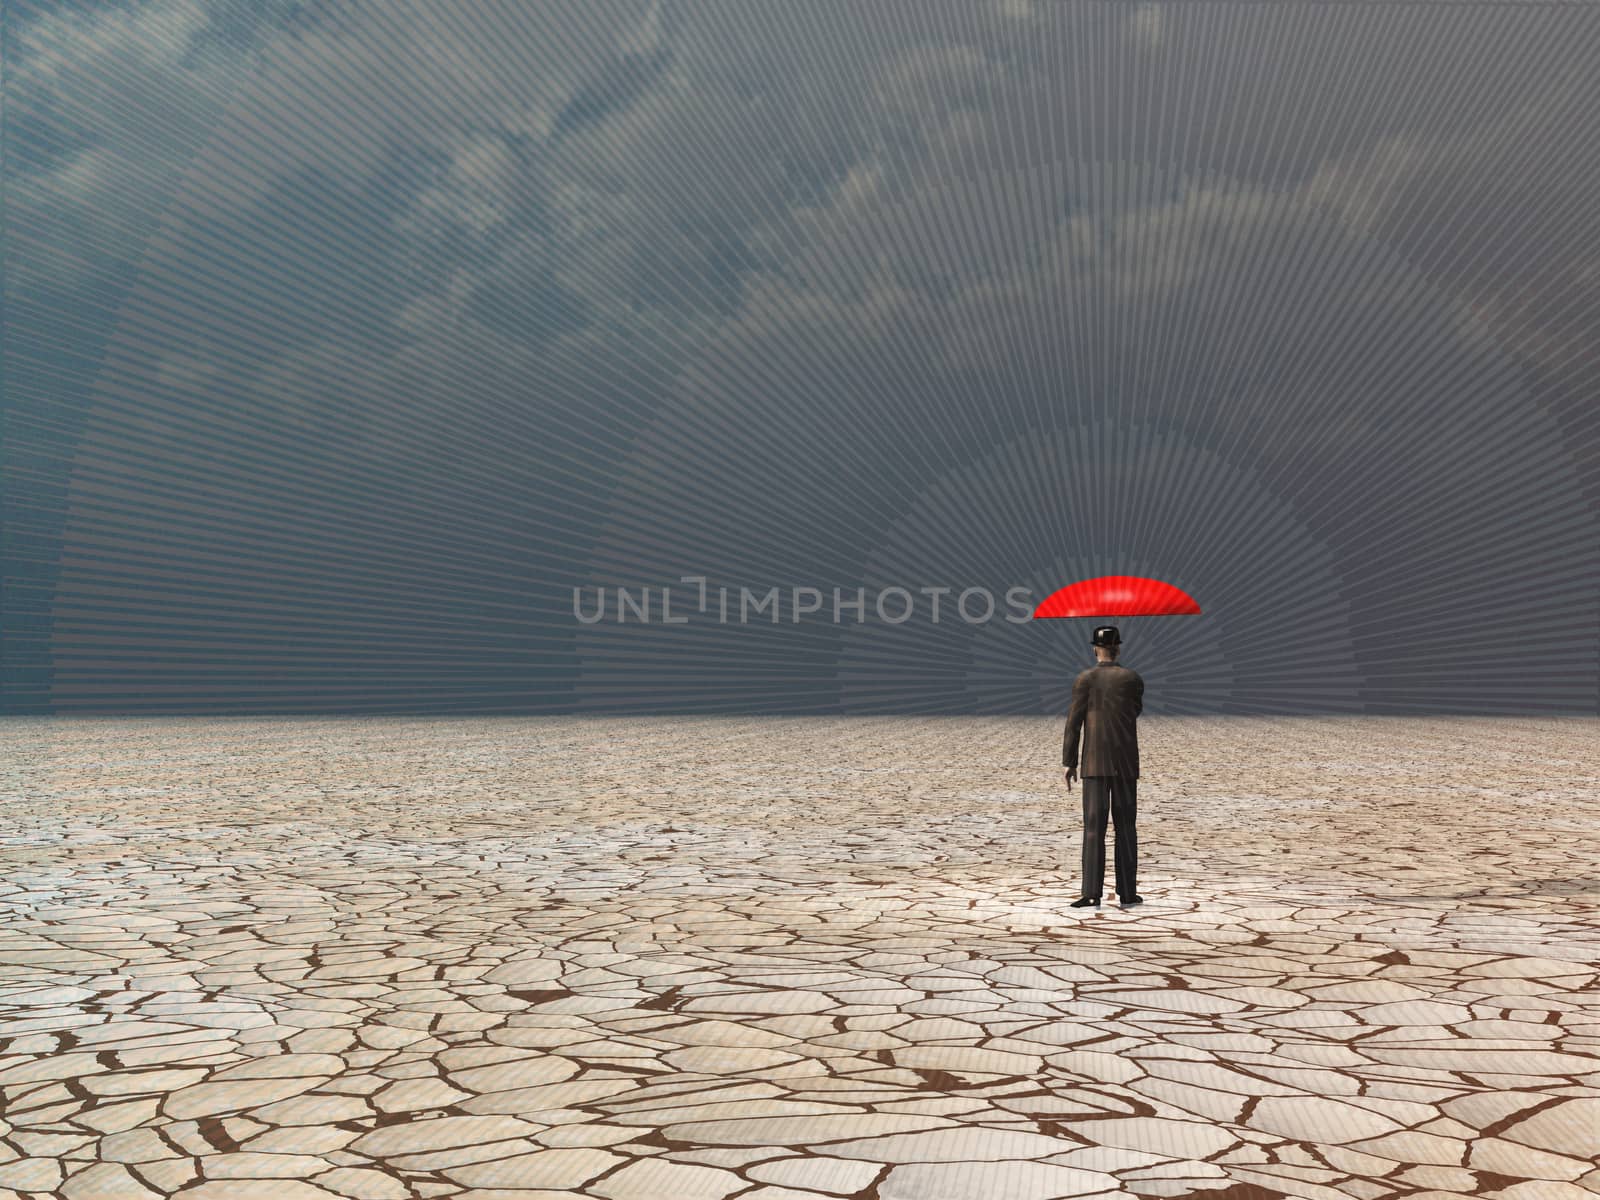 Surreal digital art. Man with red umbrella in dry land under gathering storm.